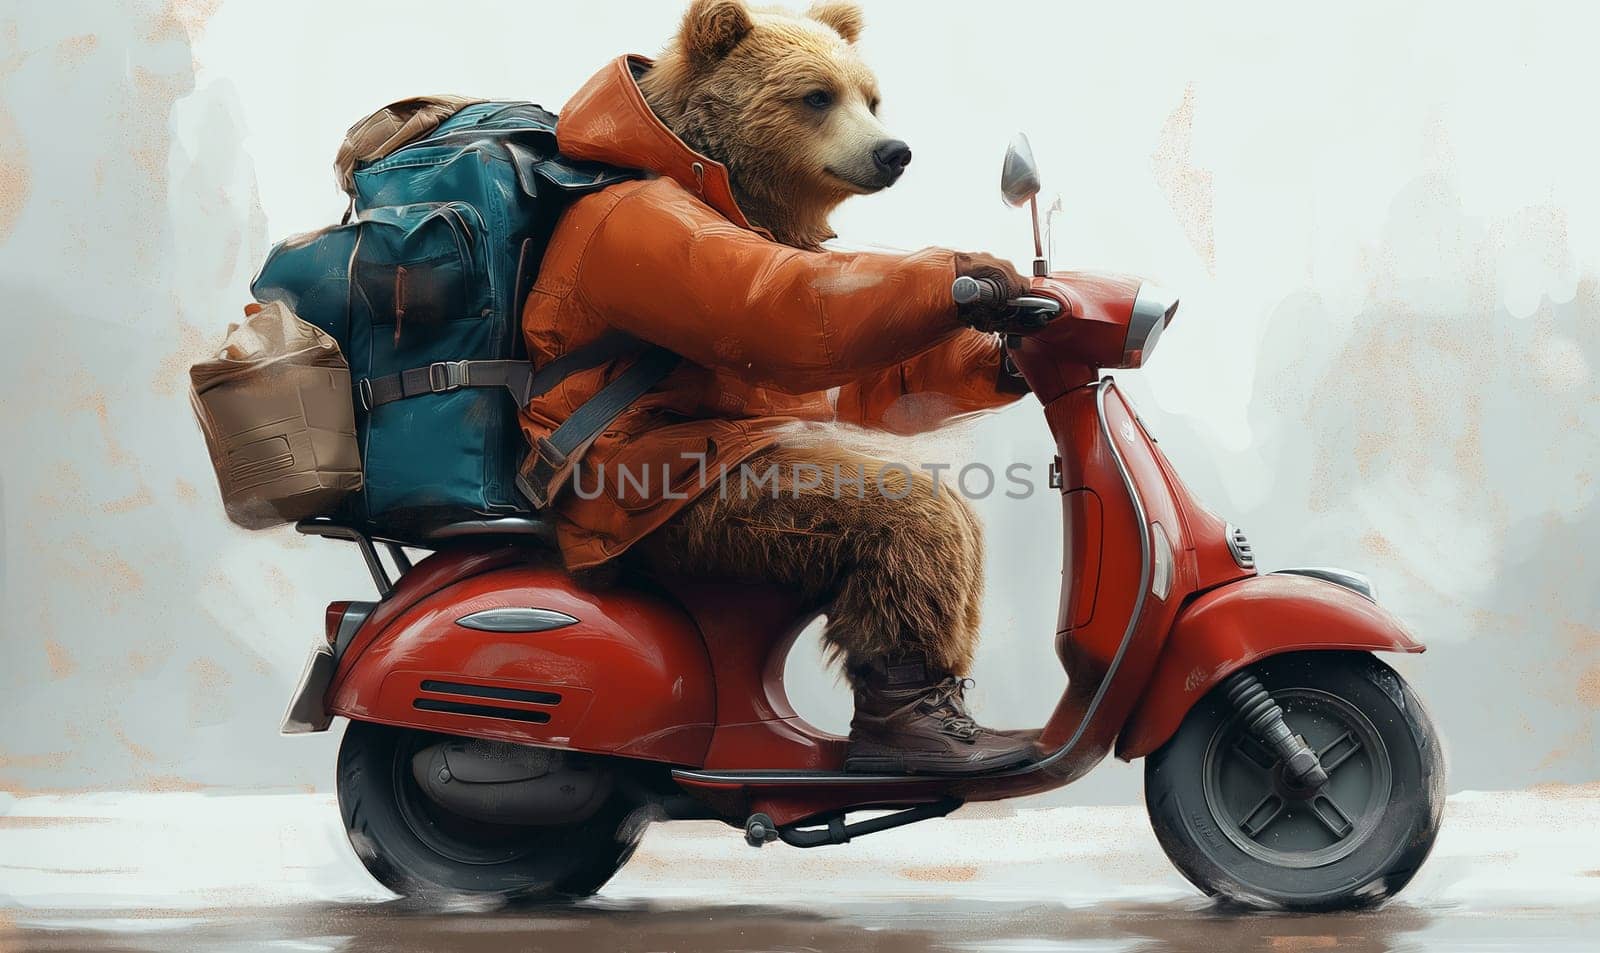 Children's illustration, a bear on a motorcycle with a backpack. Selective soft focus.